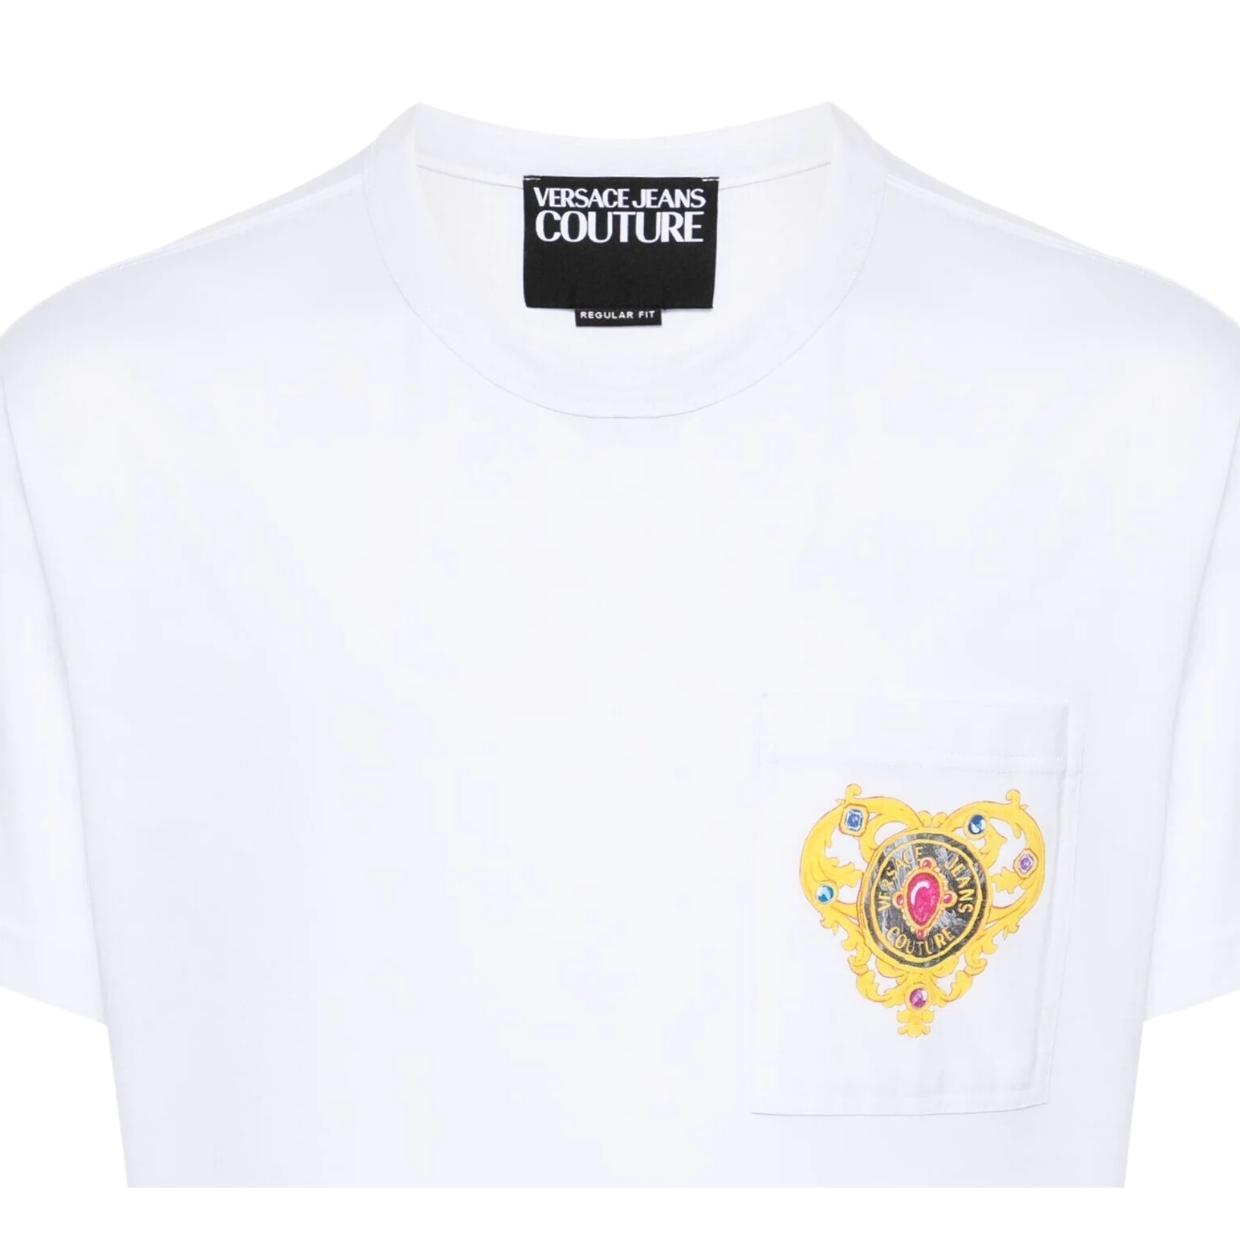 Versace Jeans Couture Heart Couture Print Chest Pocket White T-Shirt